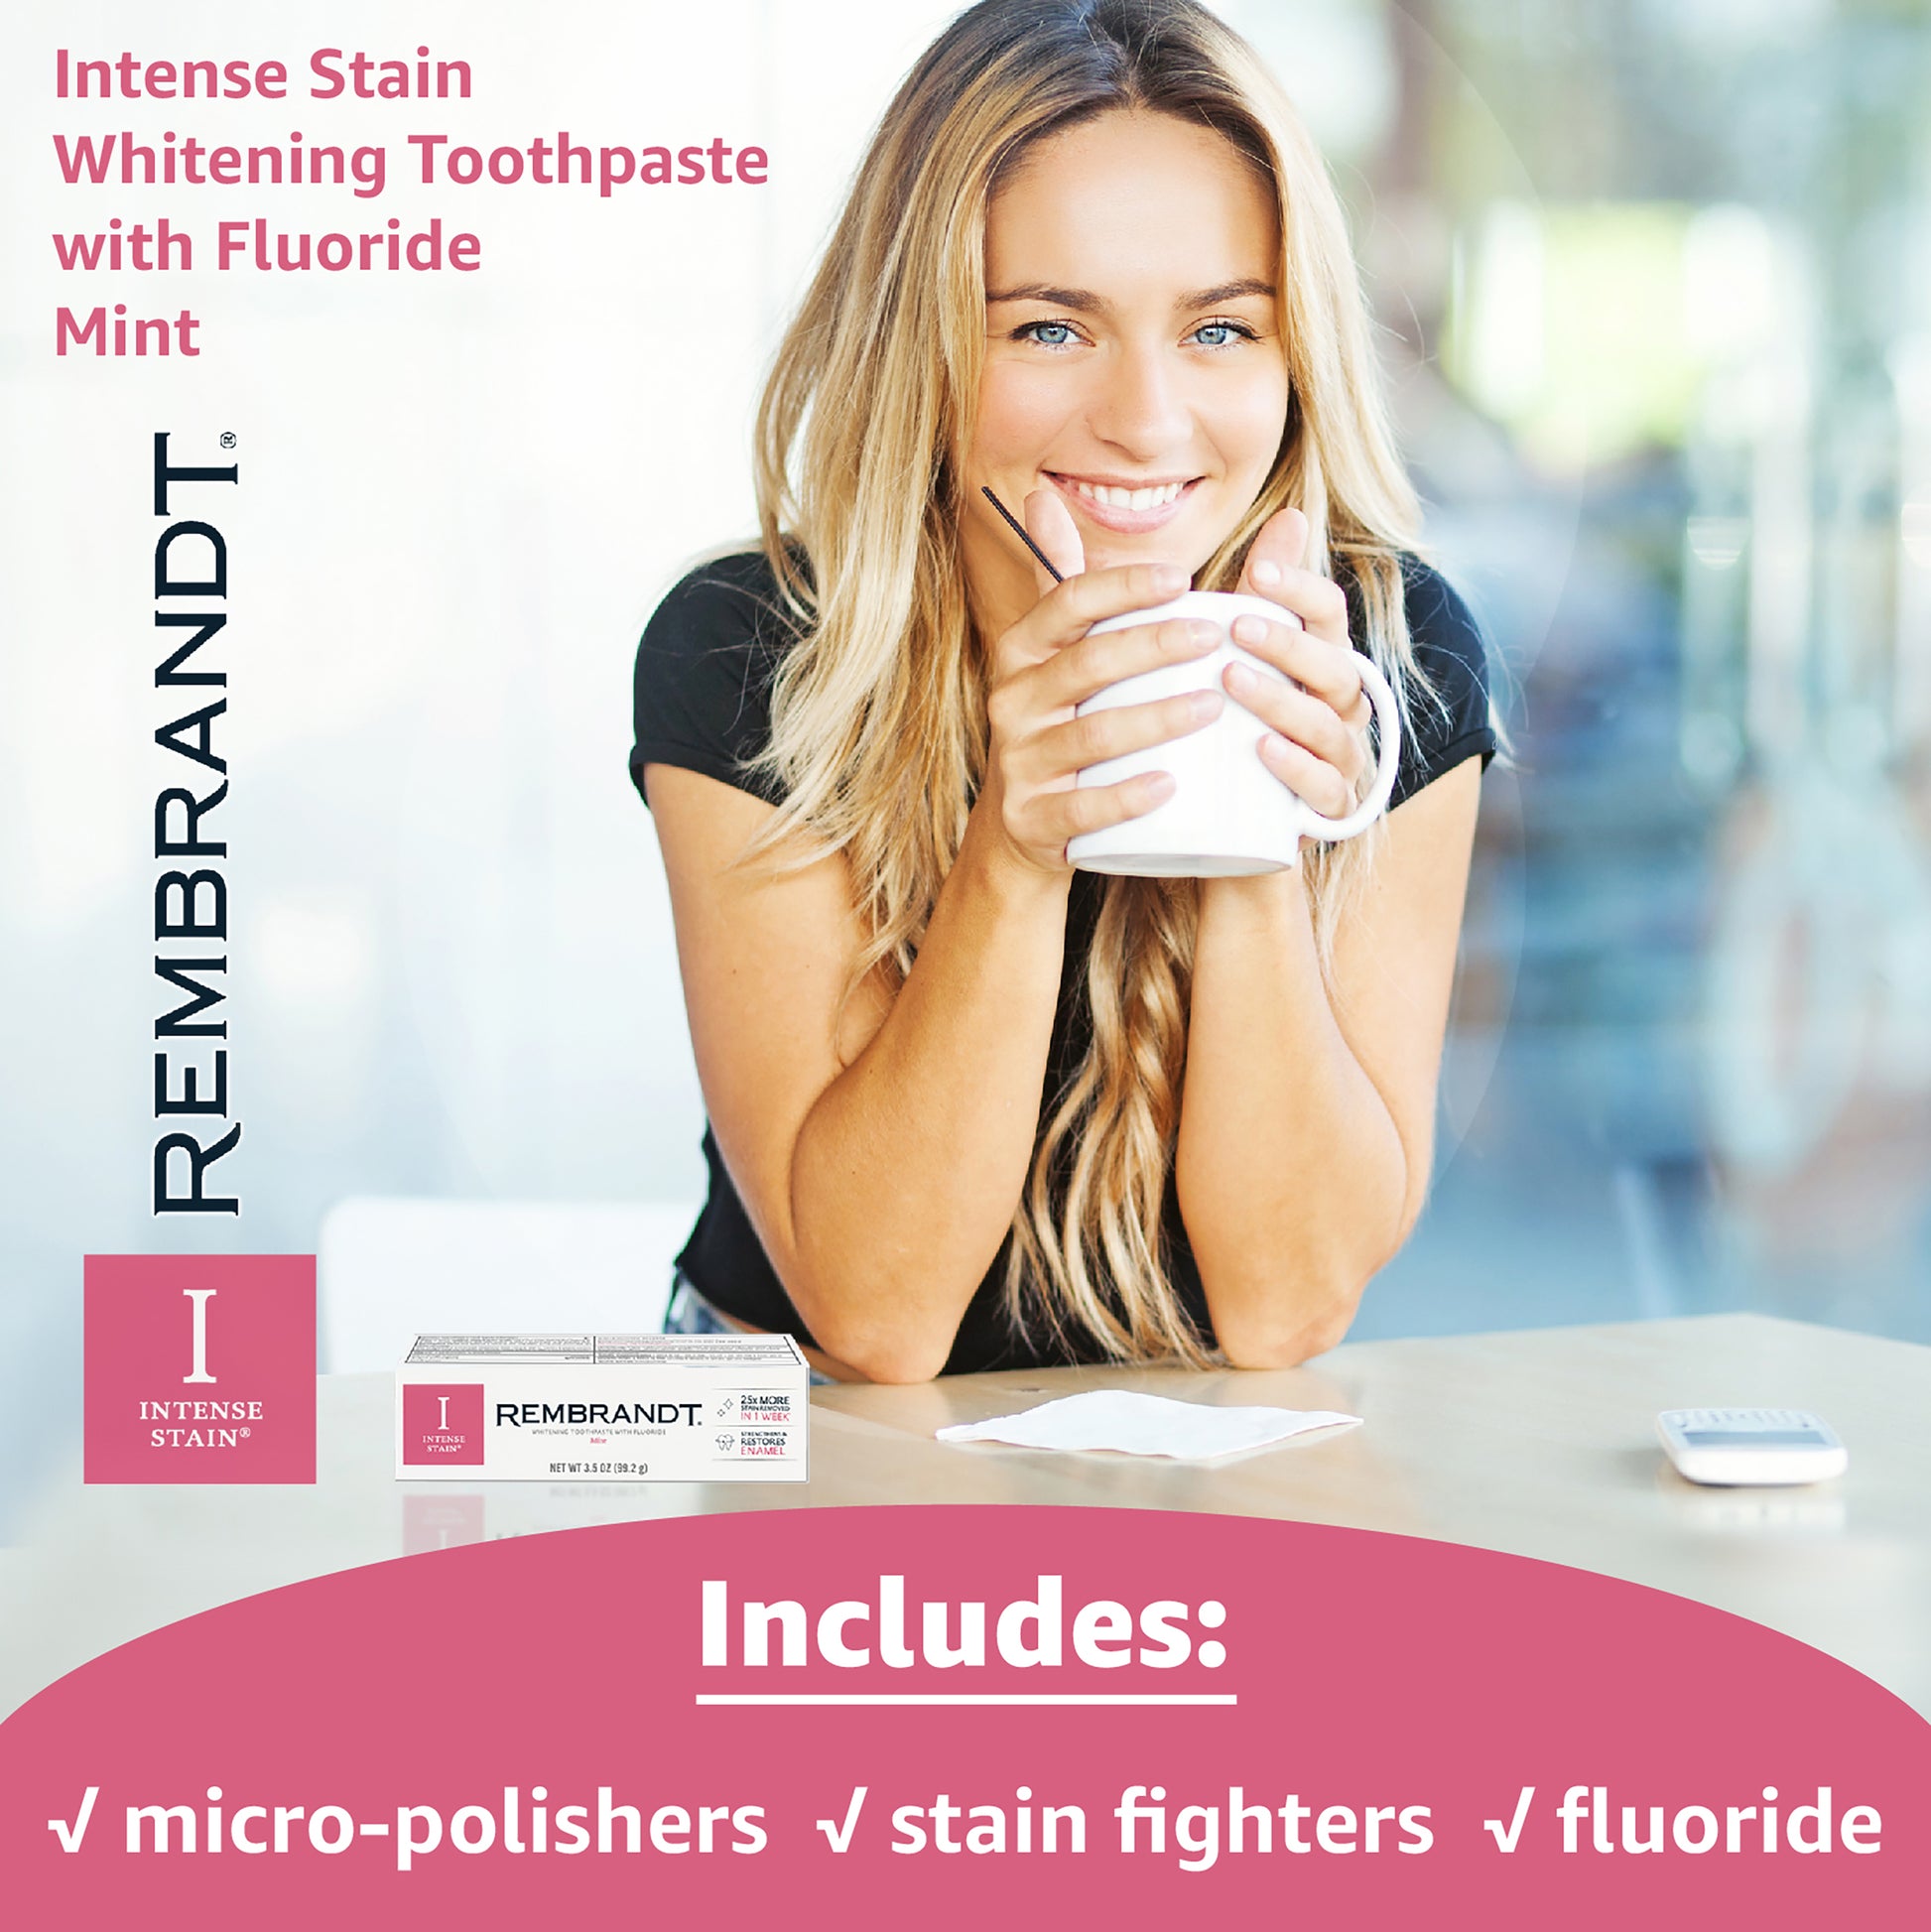 Intense Stain Whitening Toothpaste with Fluoride, Mint, includes micro-polishers, stain fighters, fluoride